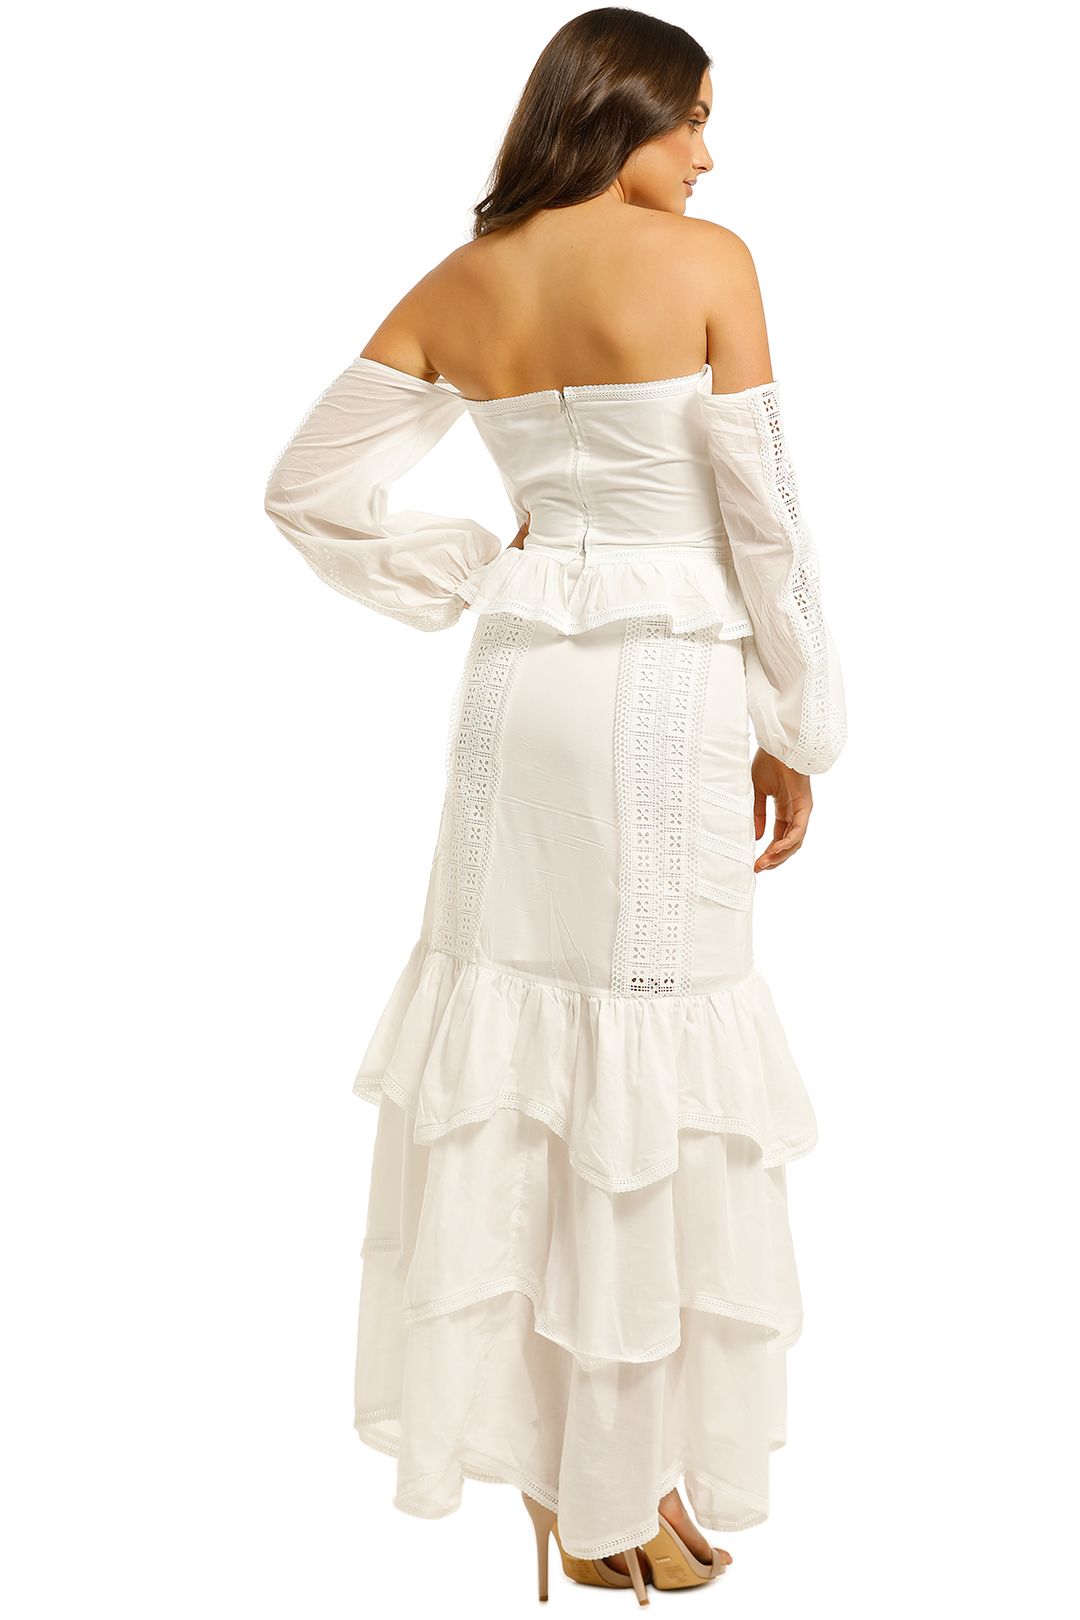 We-Are-Kindred-Sorrento-Bustier-Top-and-Skirt-Set-Ivory-Back